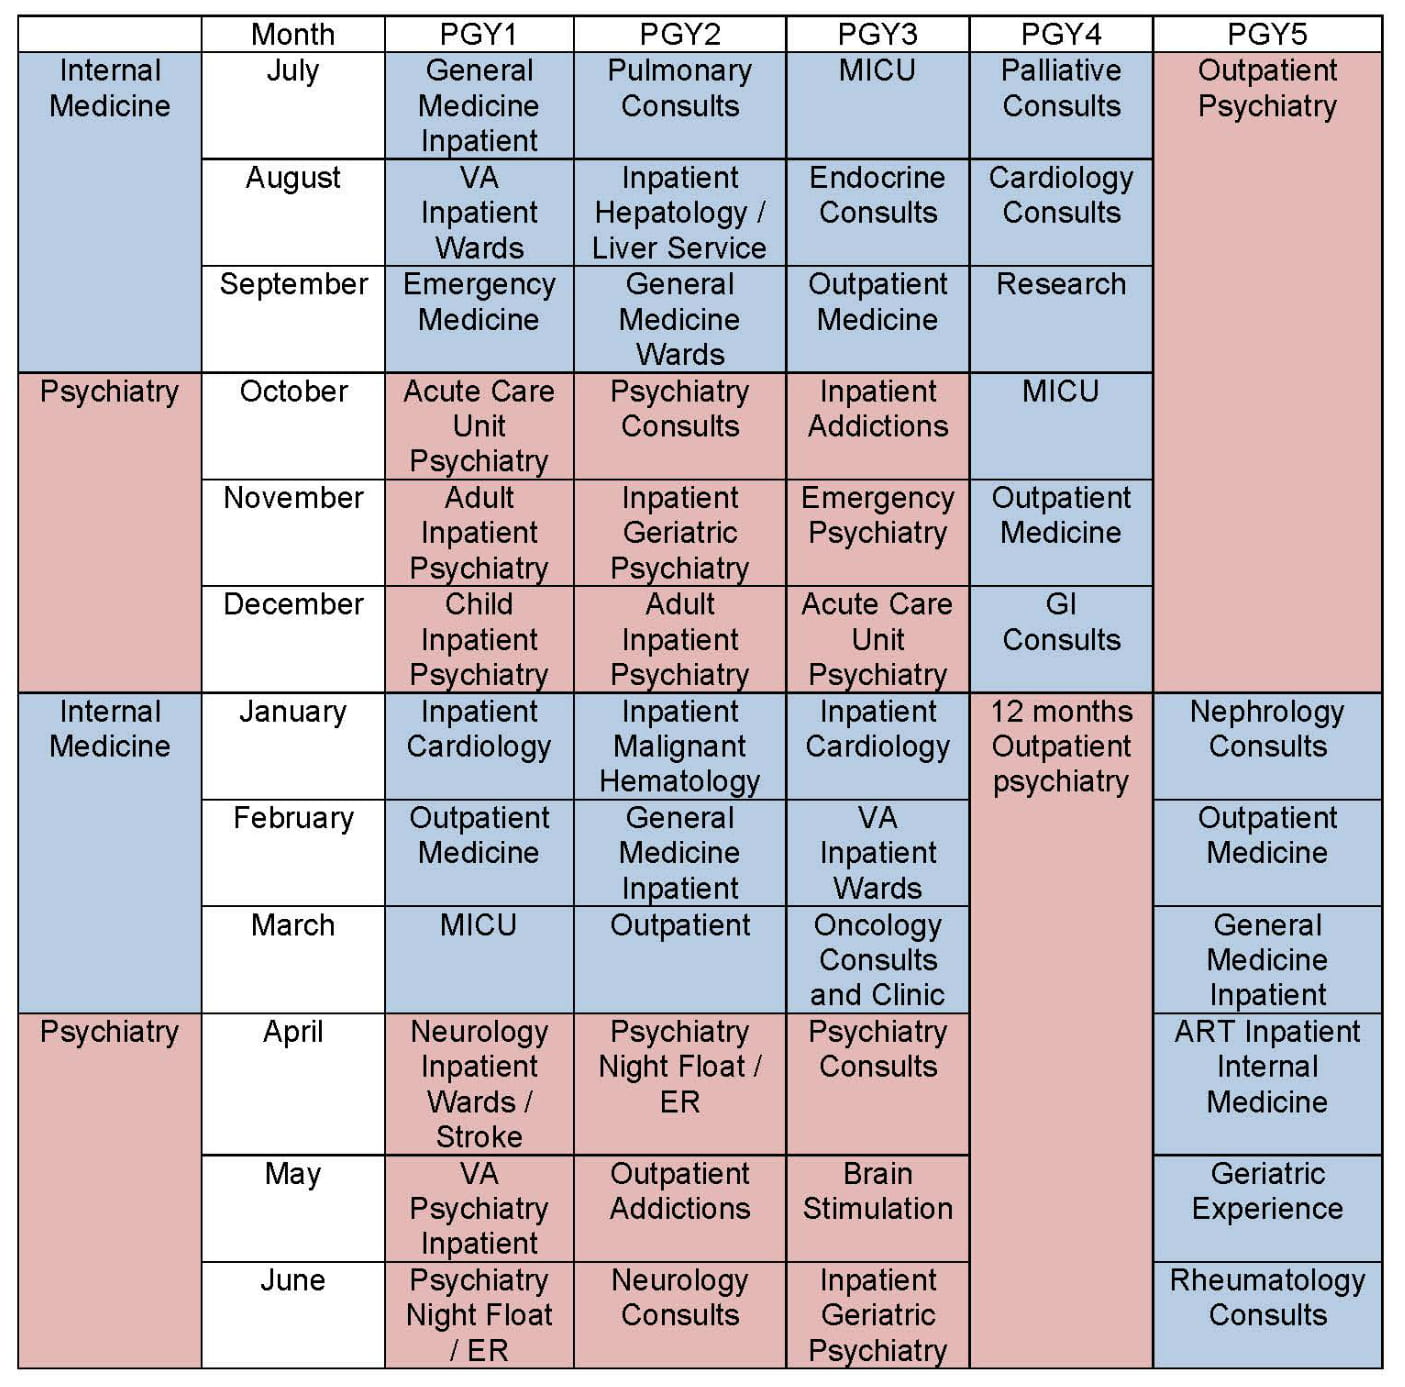 Sample schedule for the Internal Medicine and Psychiatry Residency Training Program